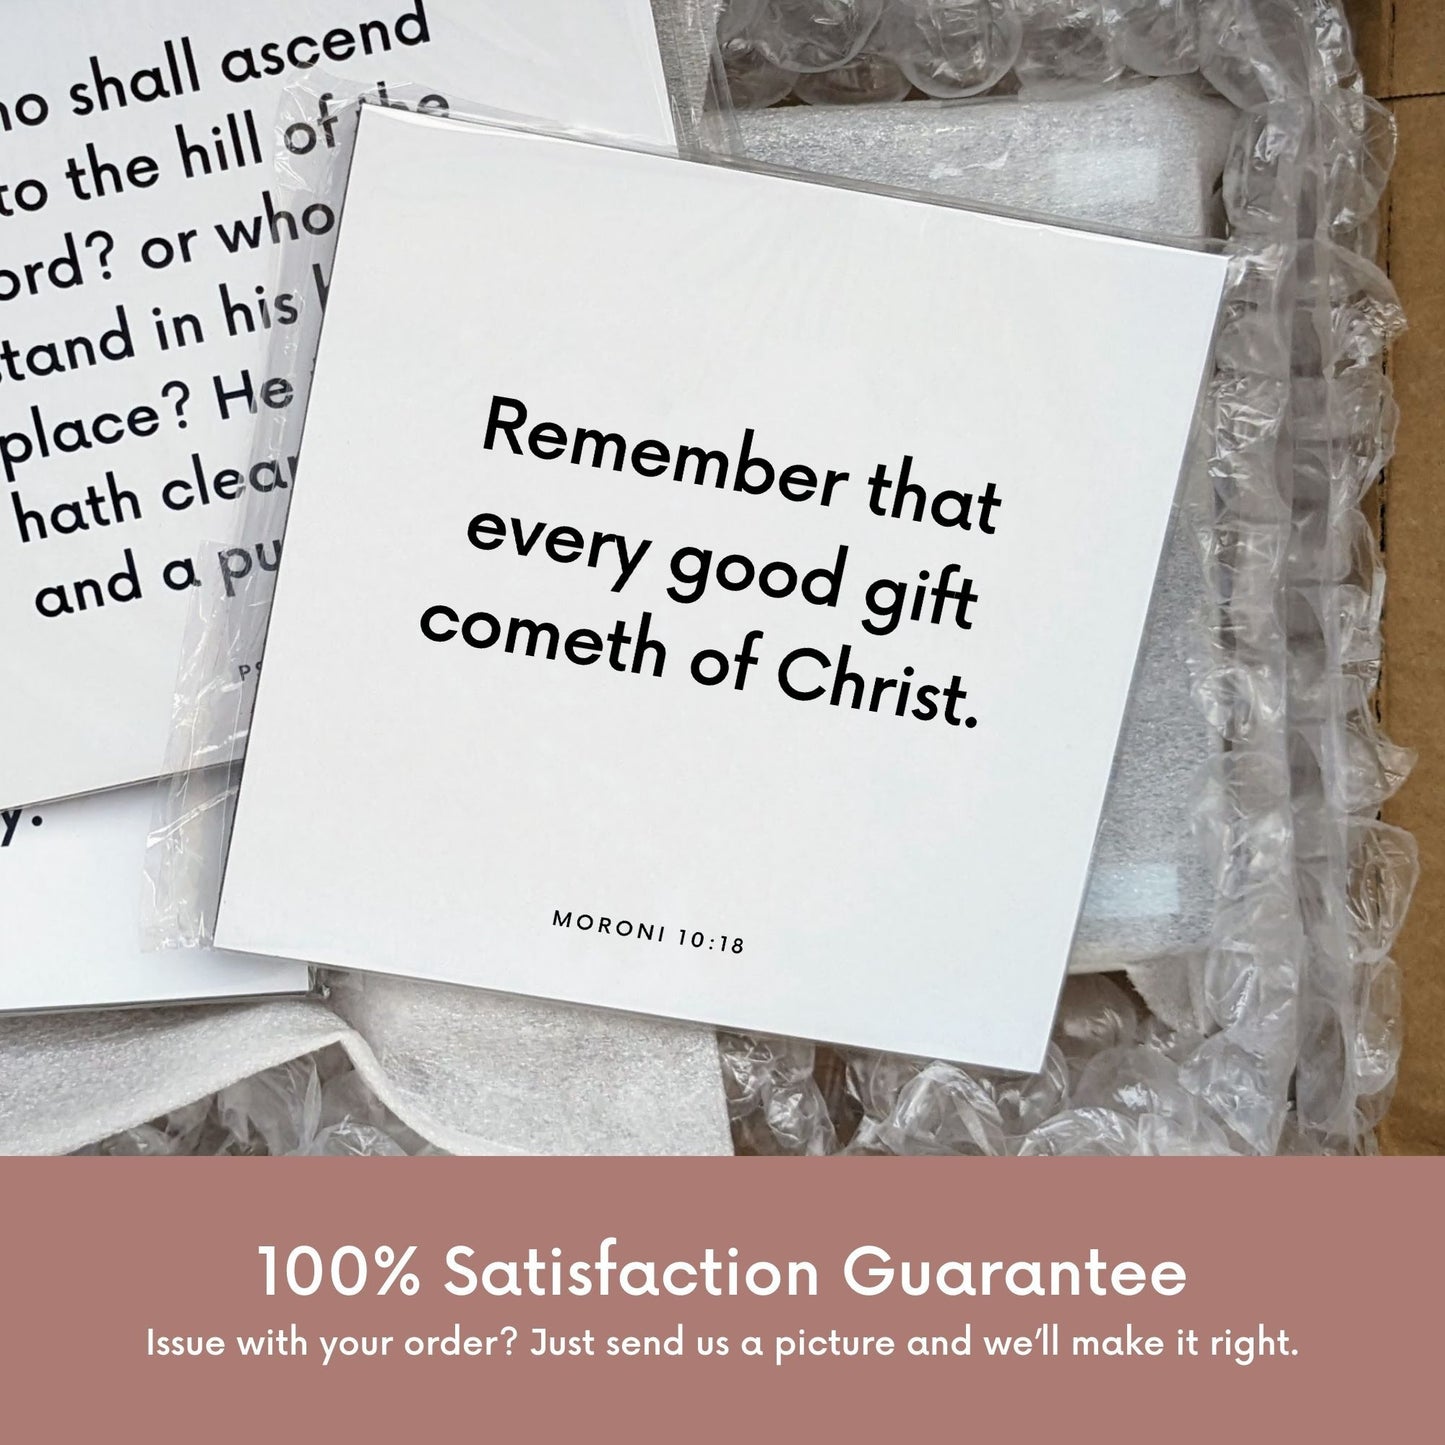 Shipping materials for scripture tile of Moroni 10:18 - "Every good gift cometh of Christ"